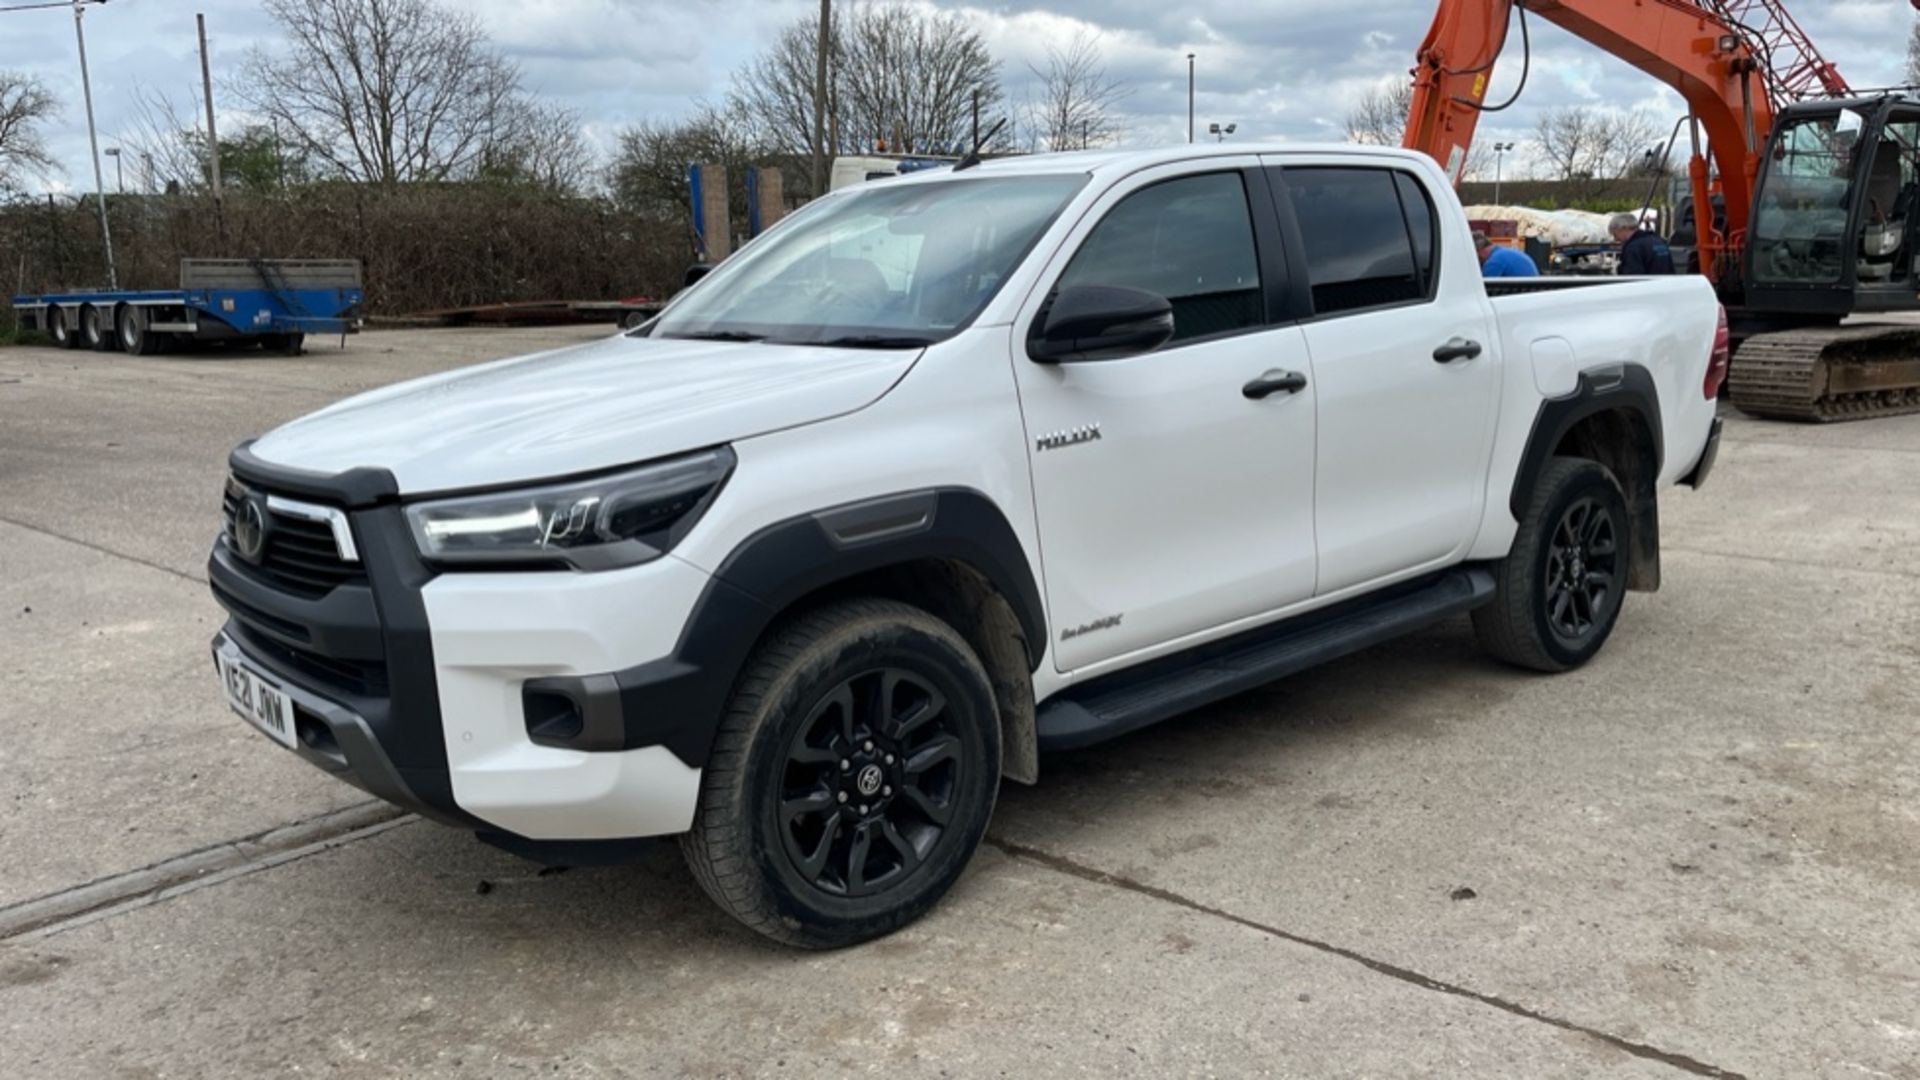 TOYOTA HILUX 2.8 D-4D INVINCIBLE X Pickup Double Cab Diesel Automatic (YEAR 2021) - Image 2 of 20